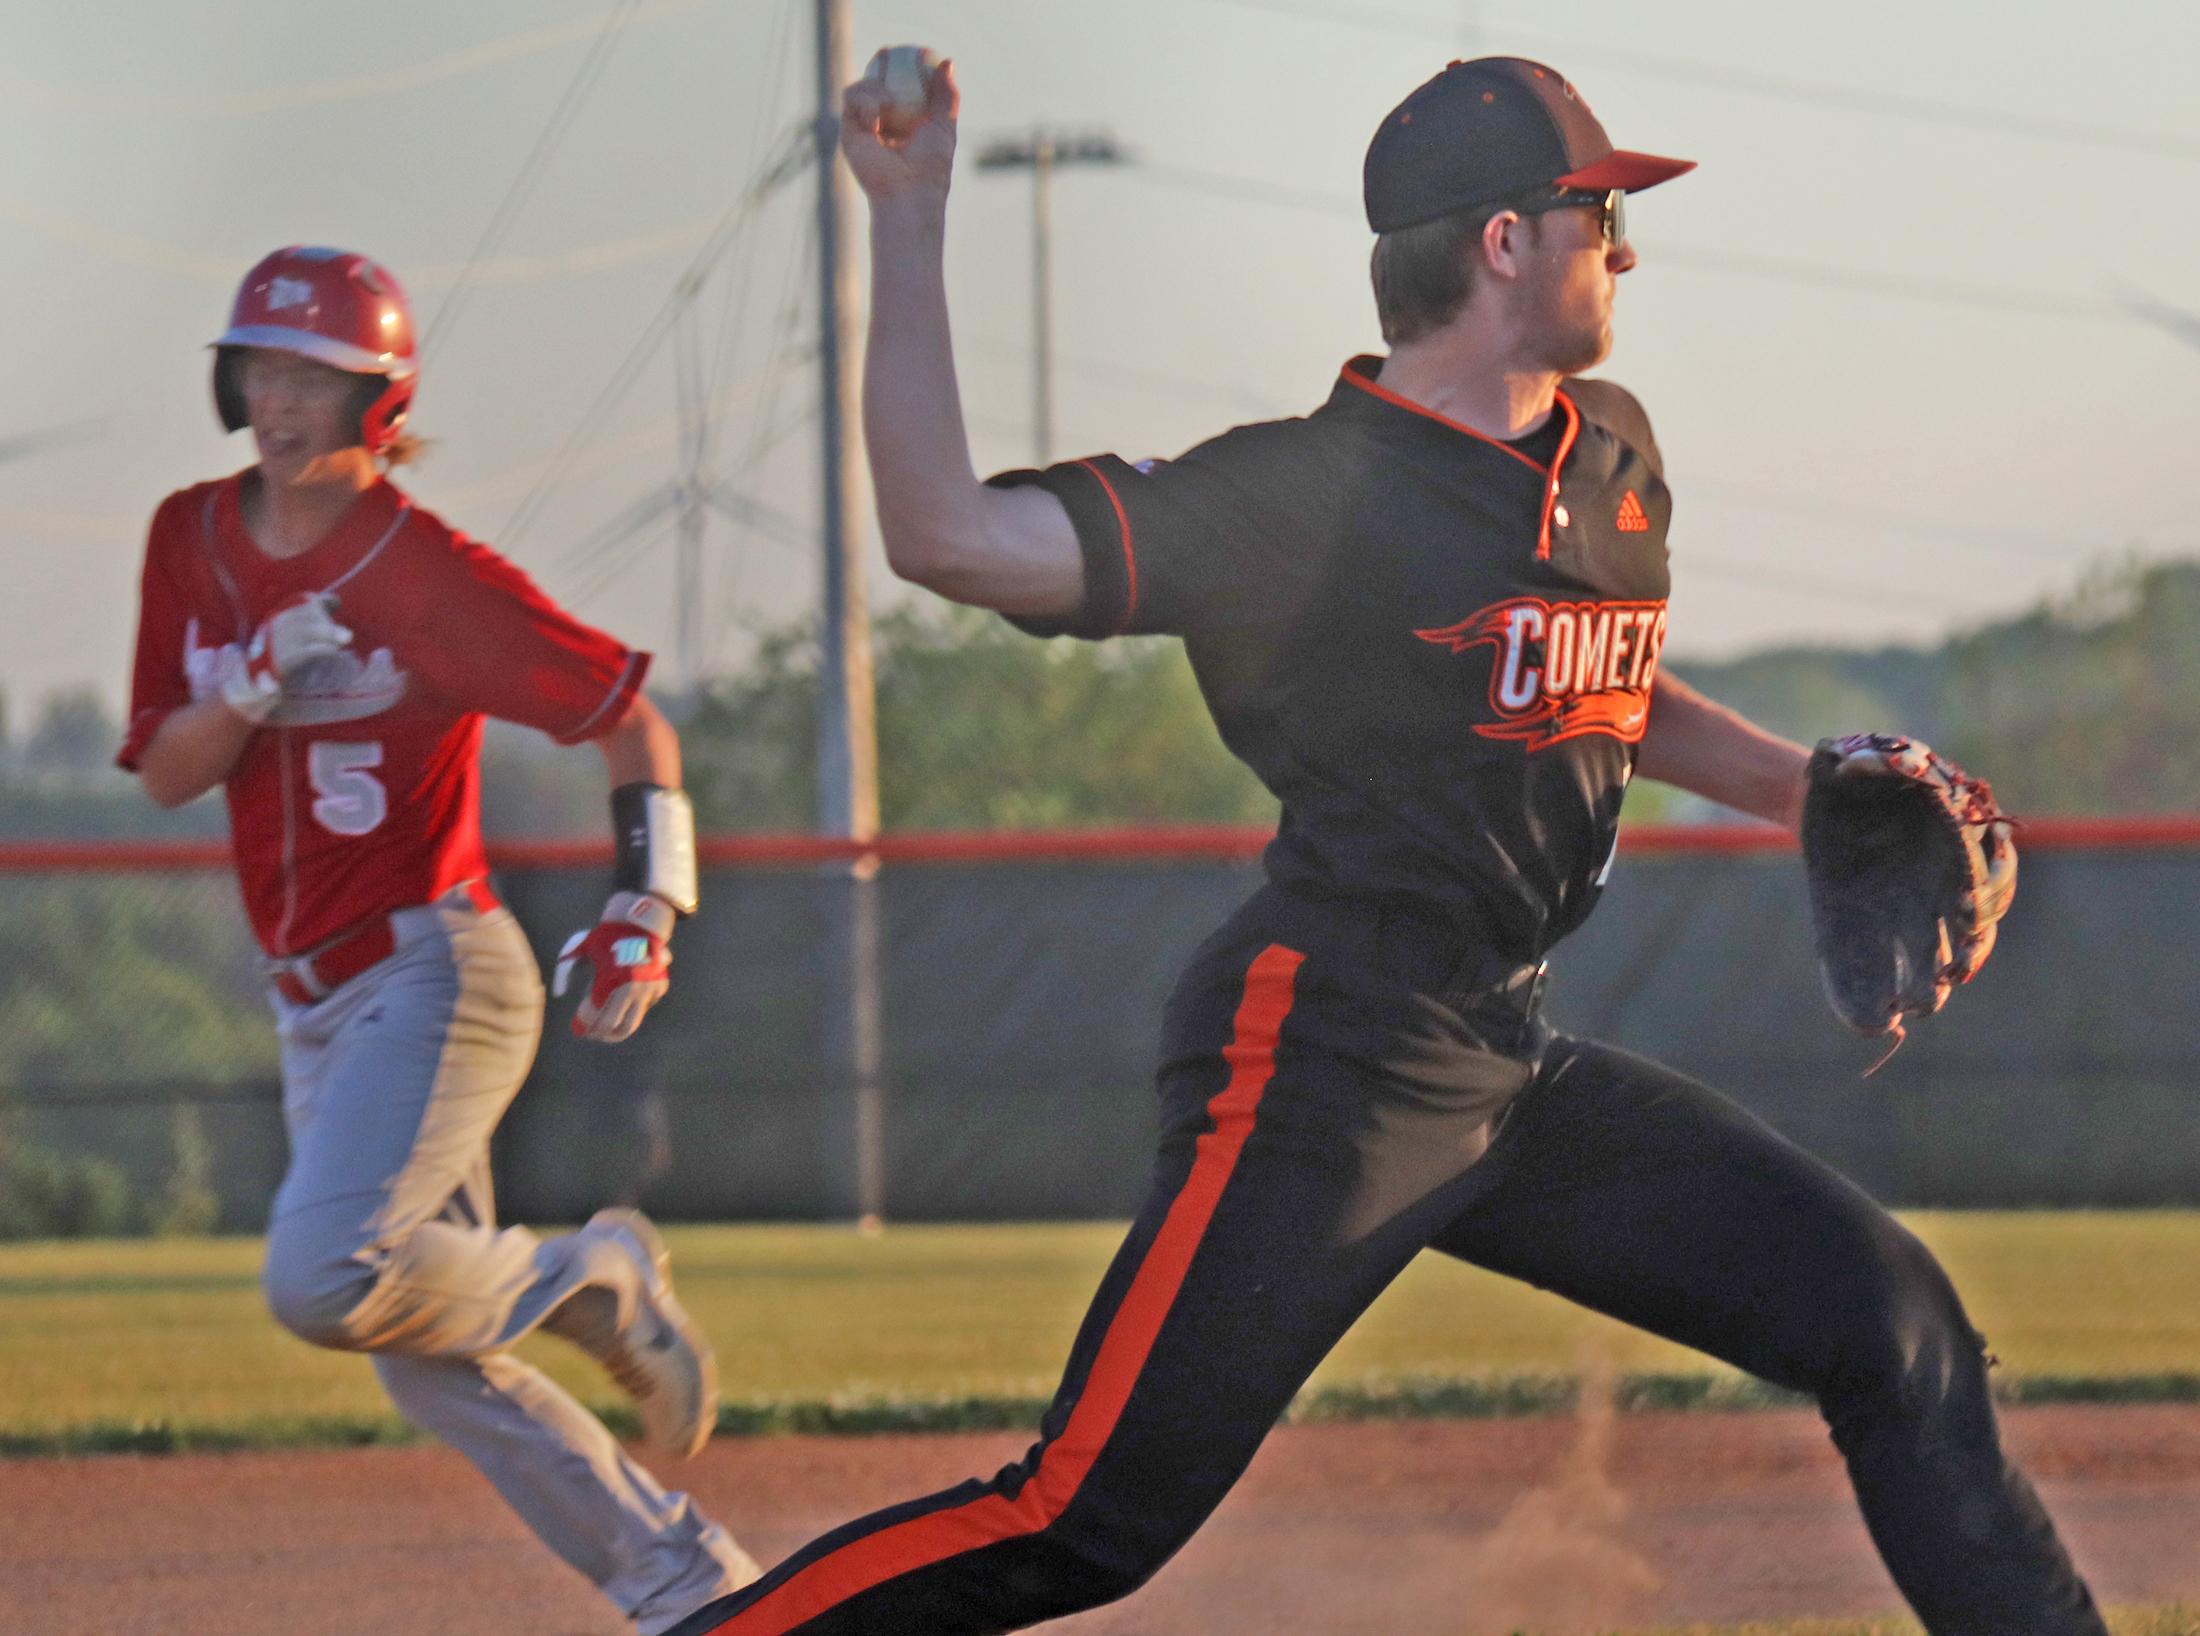 Kayden Blunt named to All-Northeast Iowa Conference Baseball Second Team